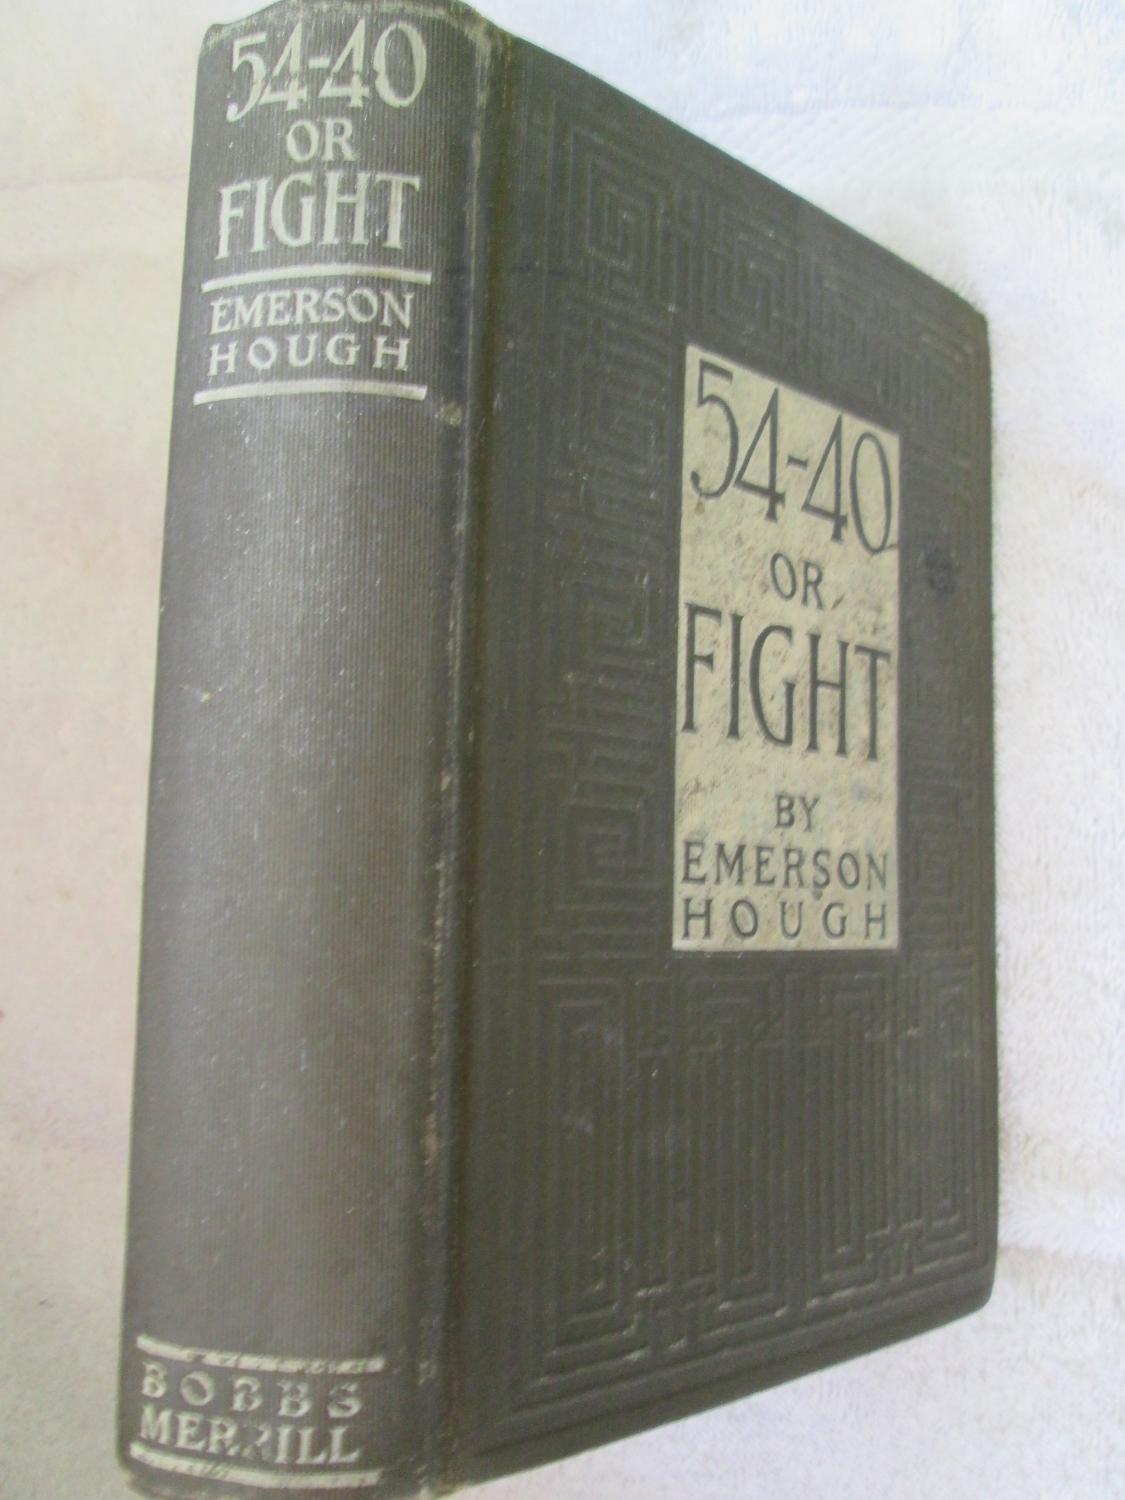 54-40 Or Fight